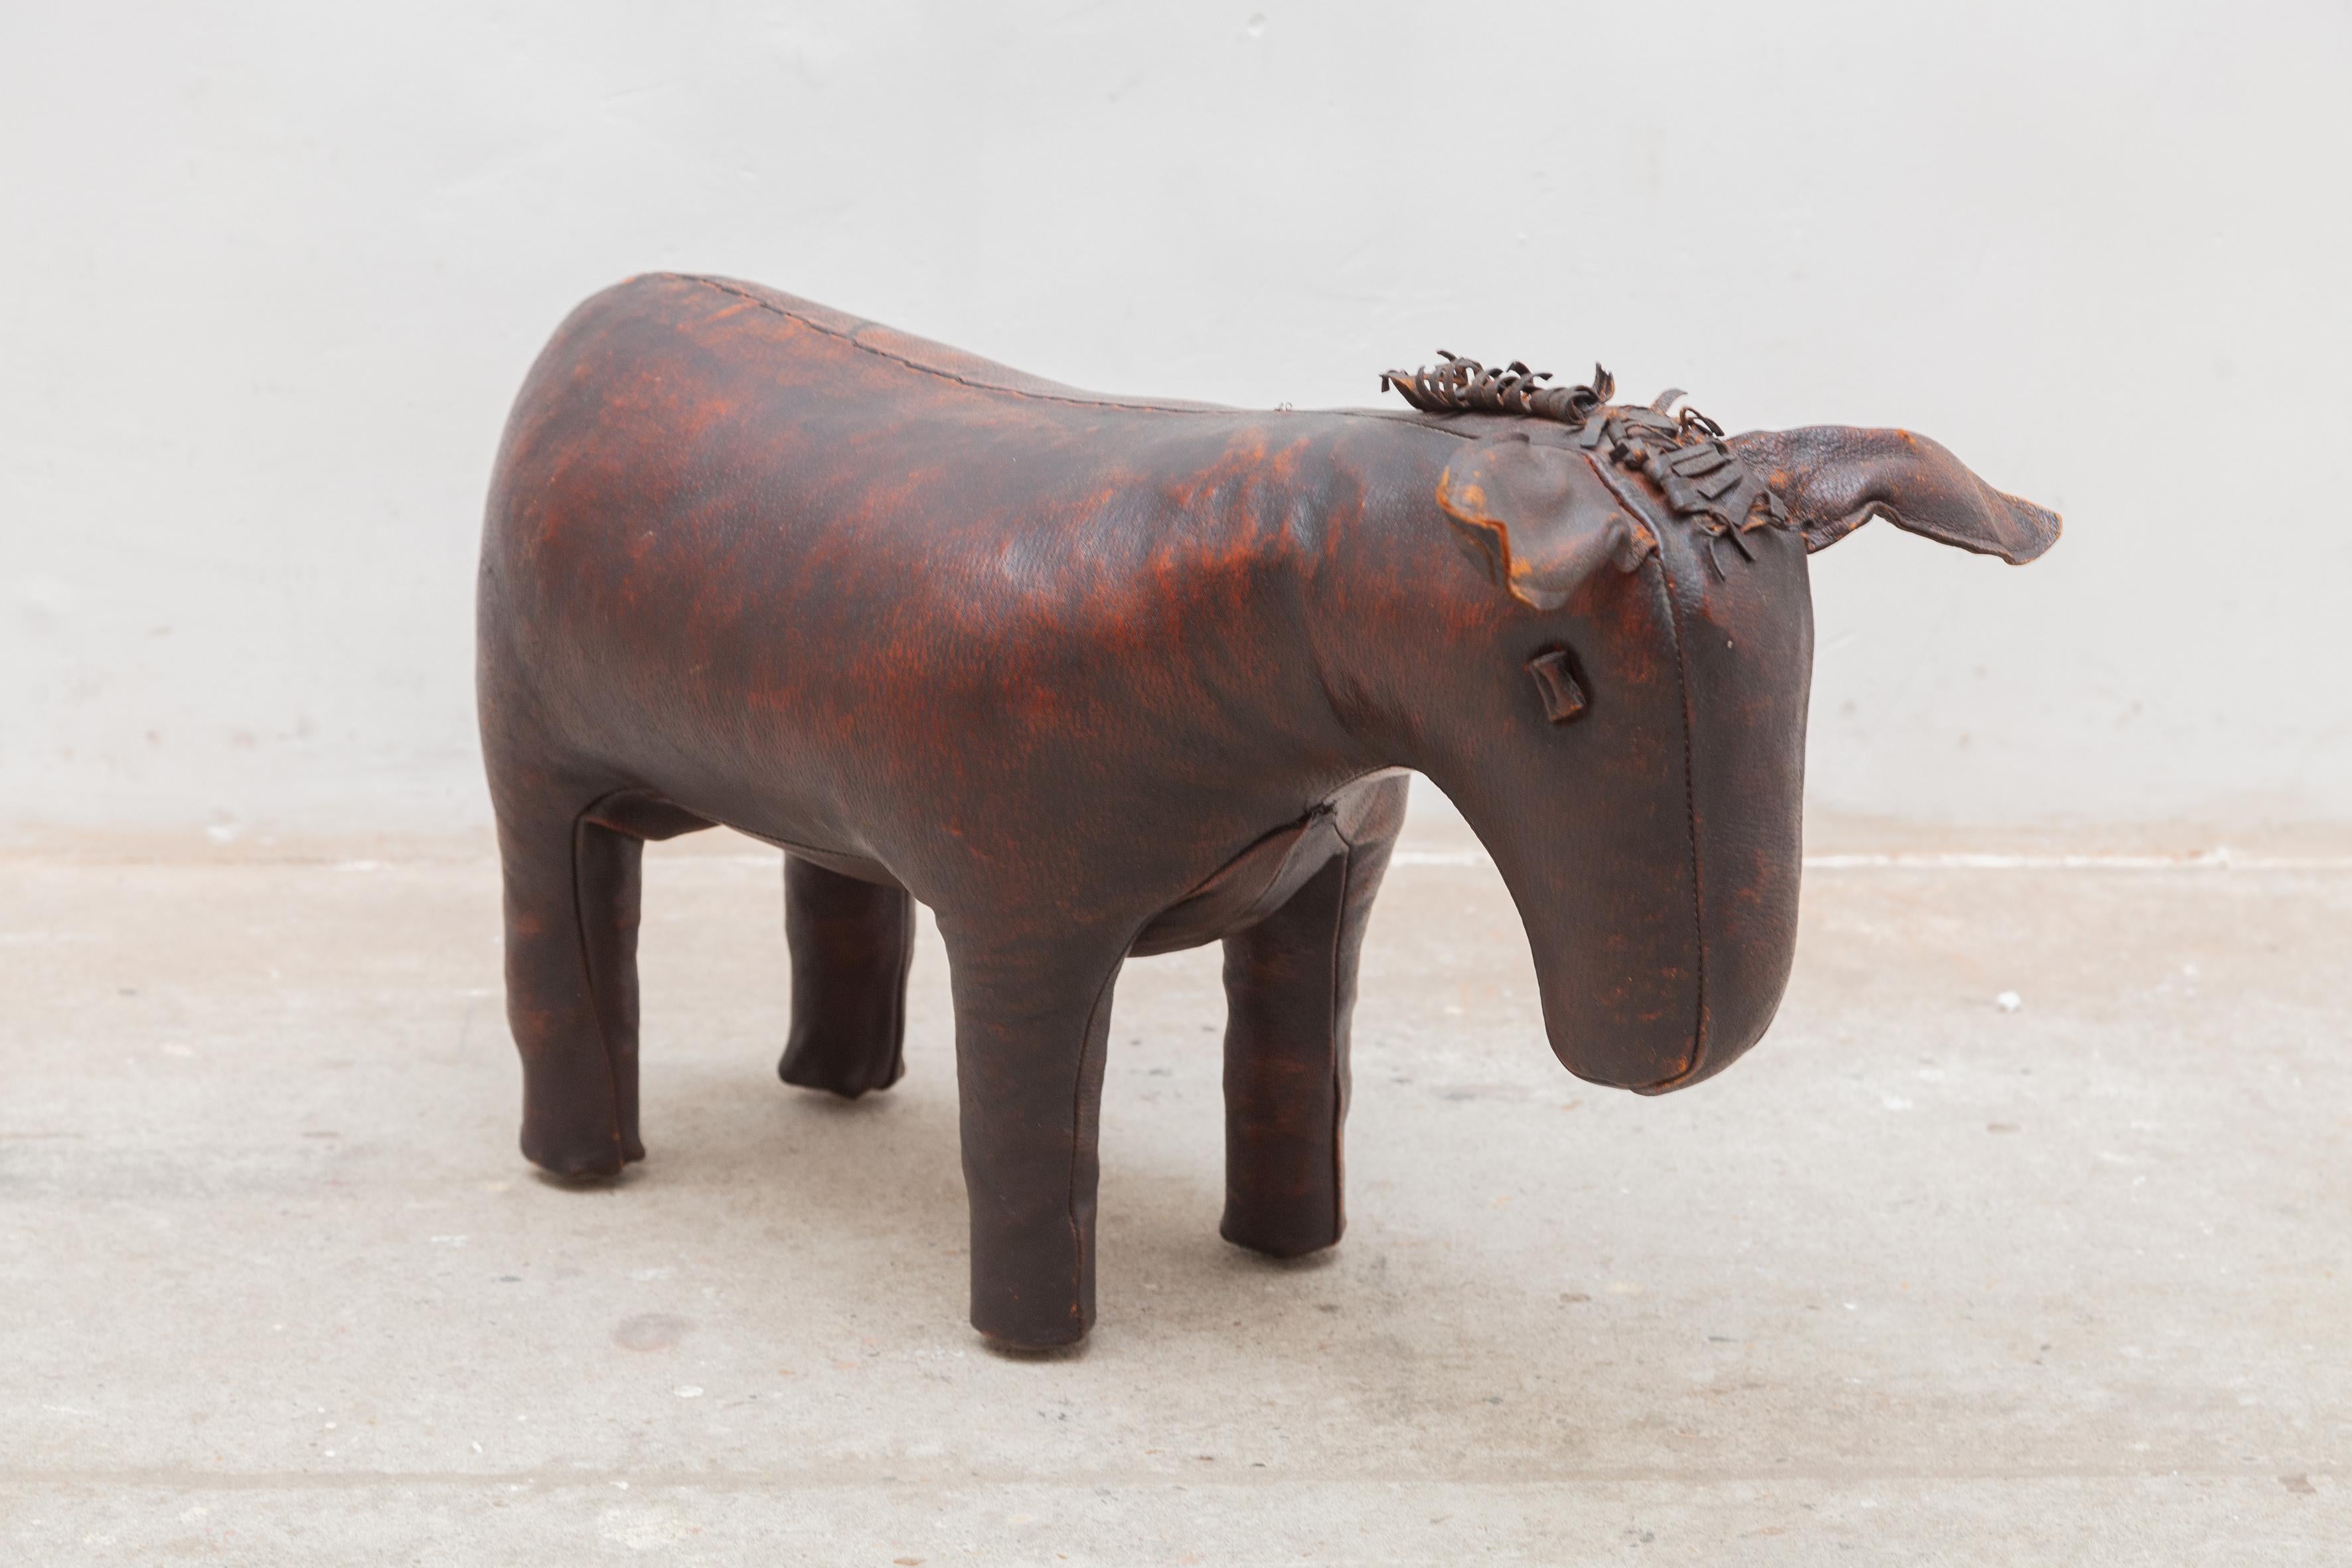 Early example Donkey in original leather ottoman by Dimitri Omersa for Liberty's of London manufactured by Abercrombie and Fitch in England, 1965. The leather is soft and supple with a beautiful aged patina.

The pig was the first produced animal